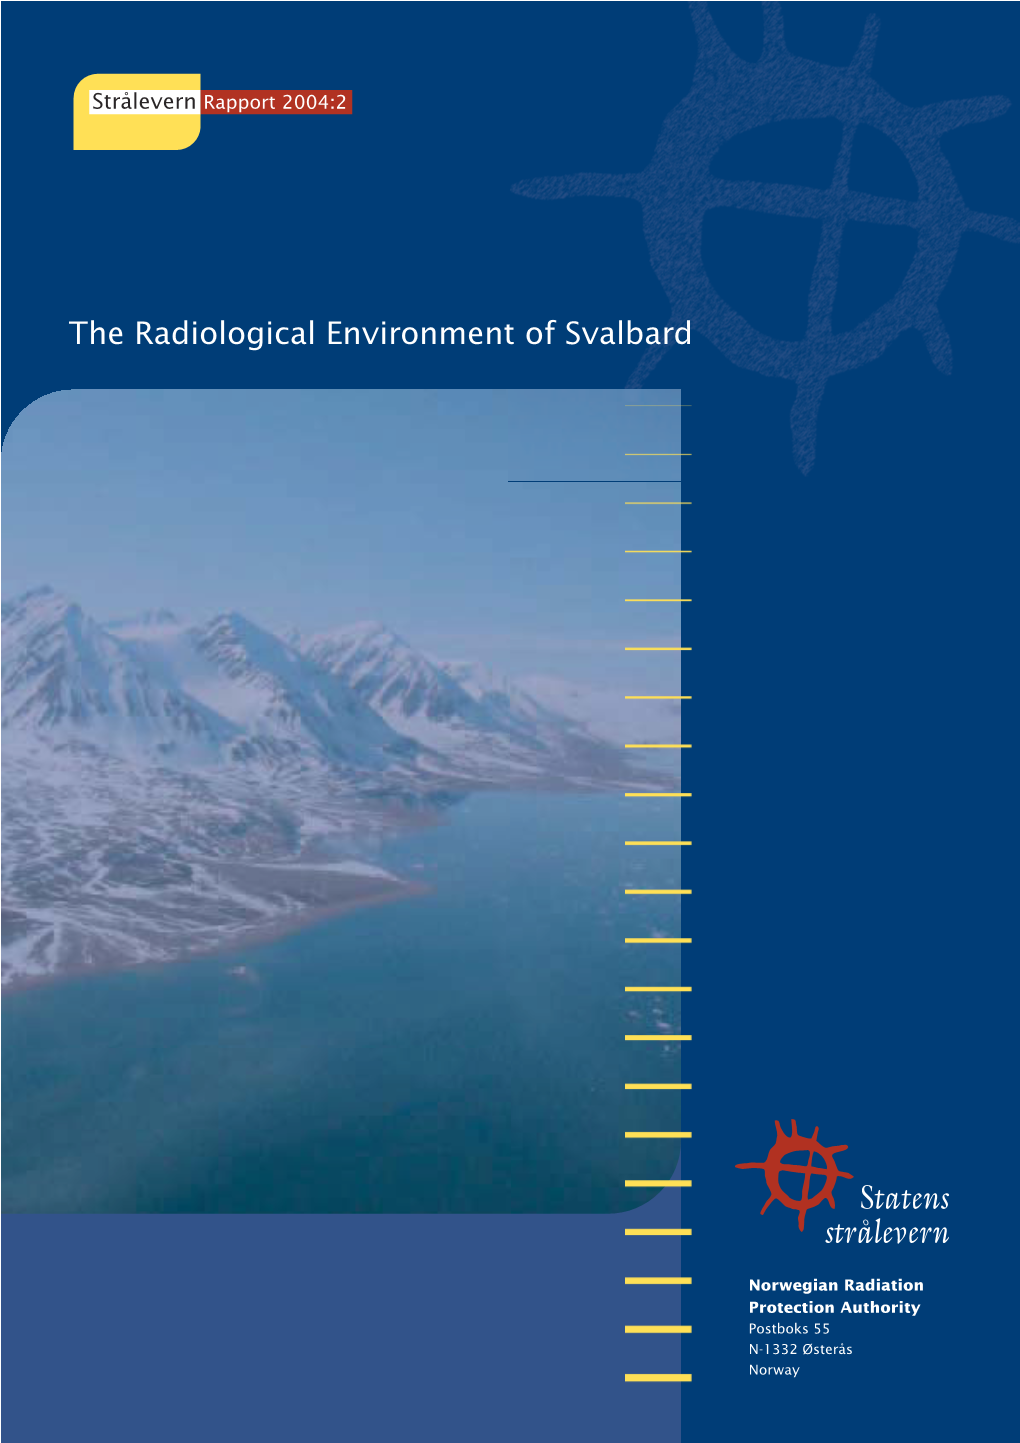 The Radiological Environment of Svalbard